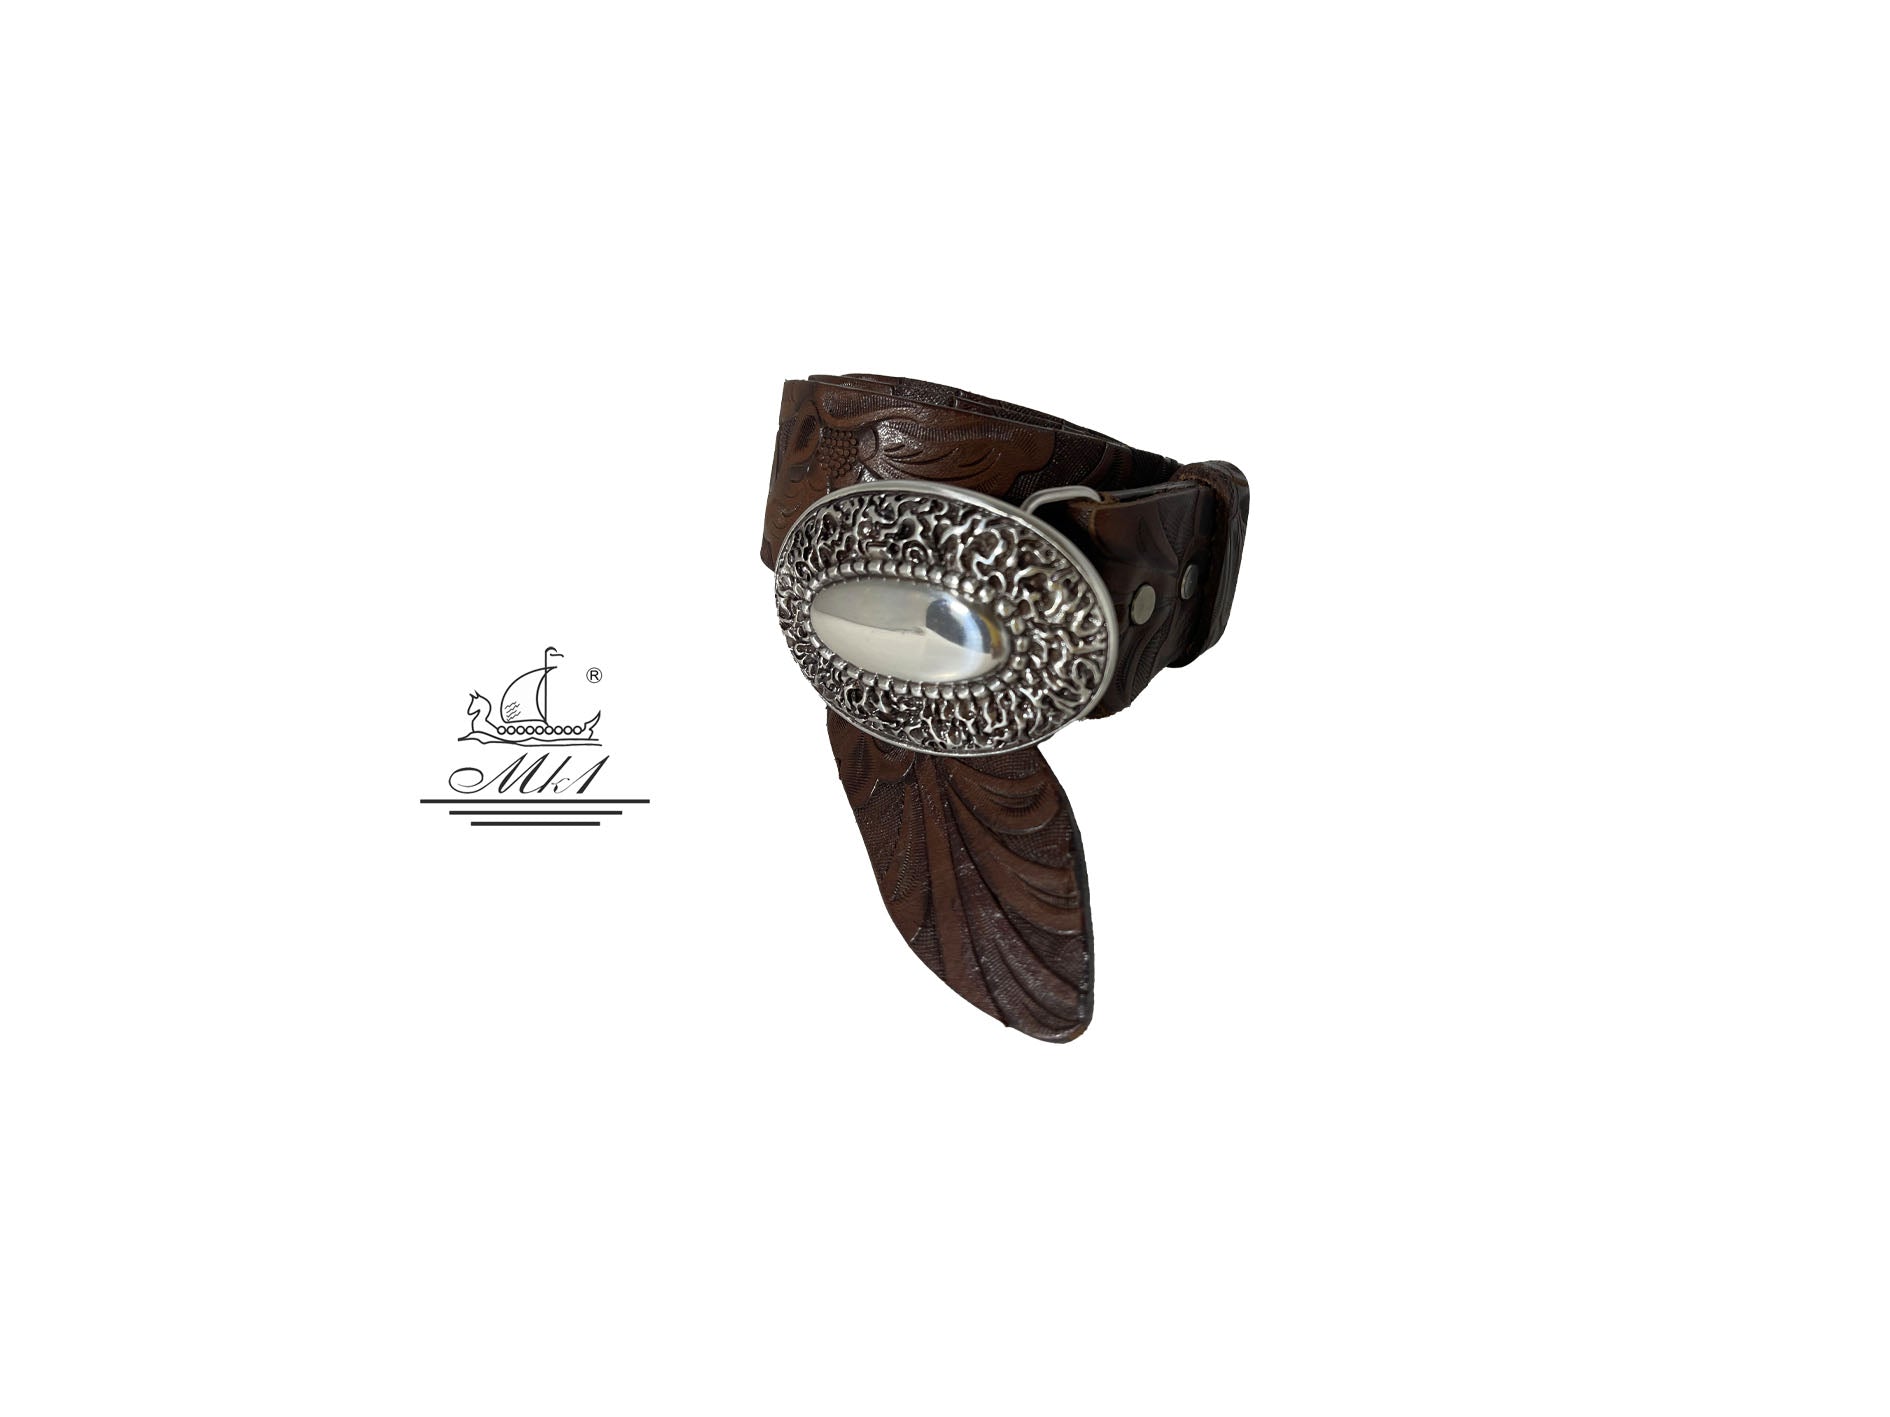 Unisex 4cm wide belt handcrafted from brown leather with flower design. 101134/40BR/LD